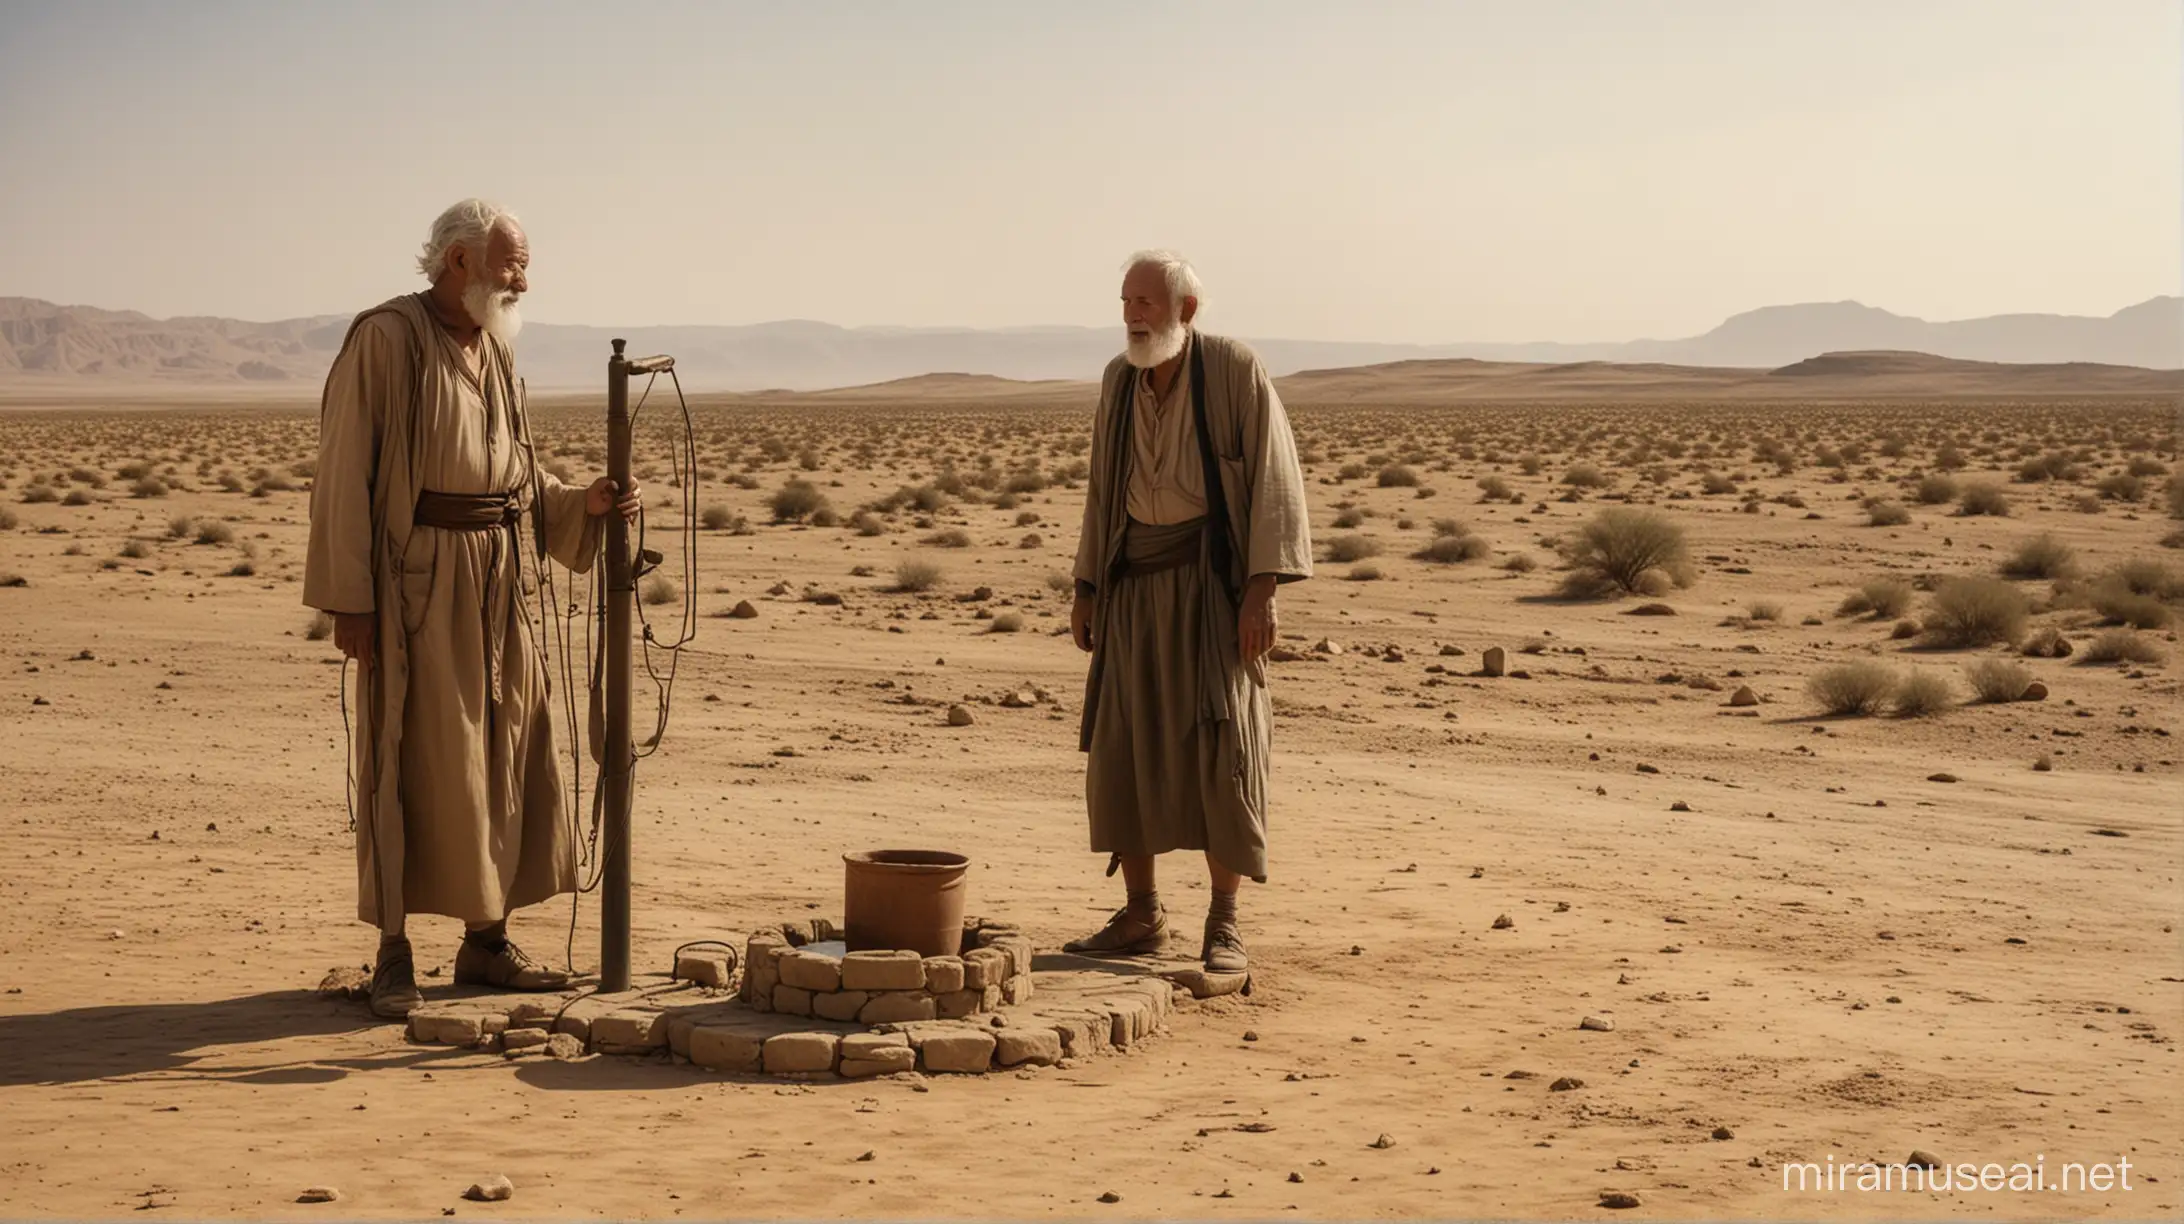 2 old men in the foreground, with a water well in the distance, set in a desert during the era of moses